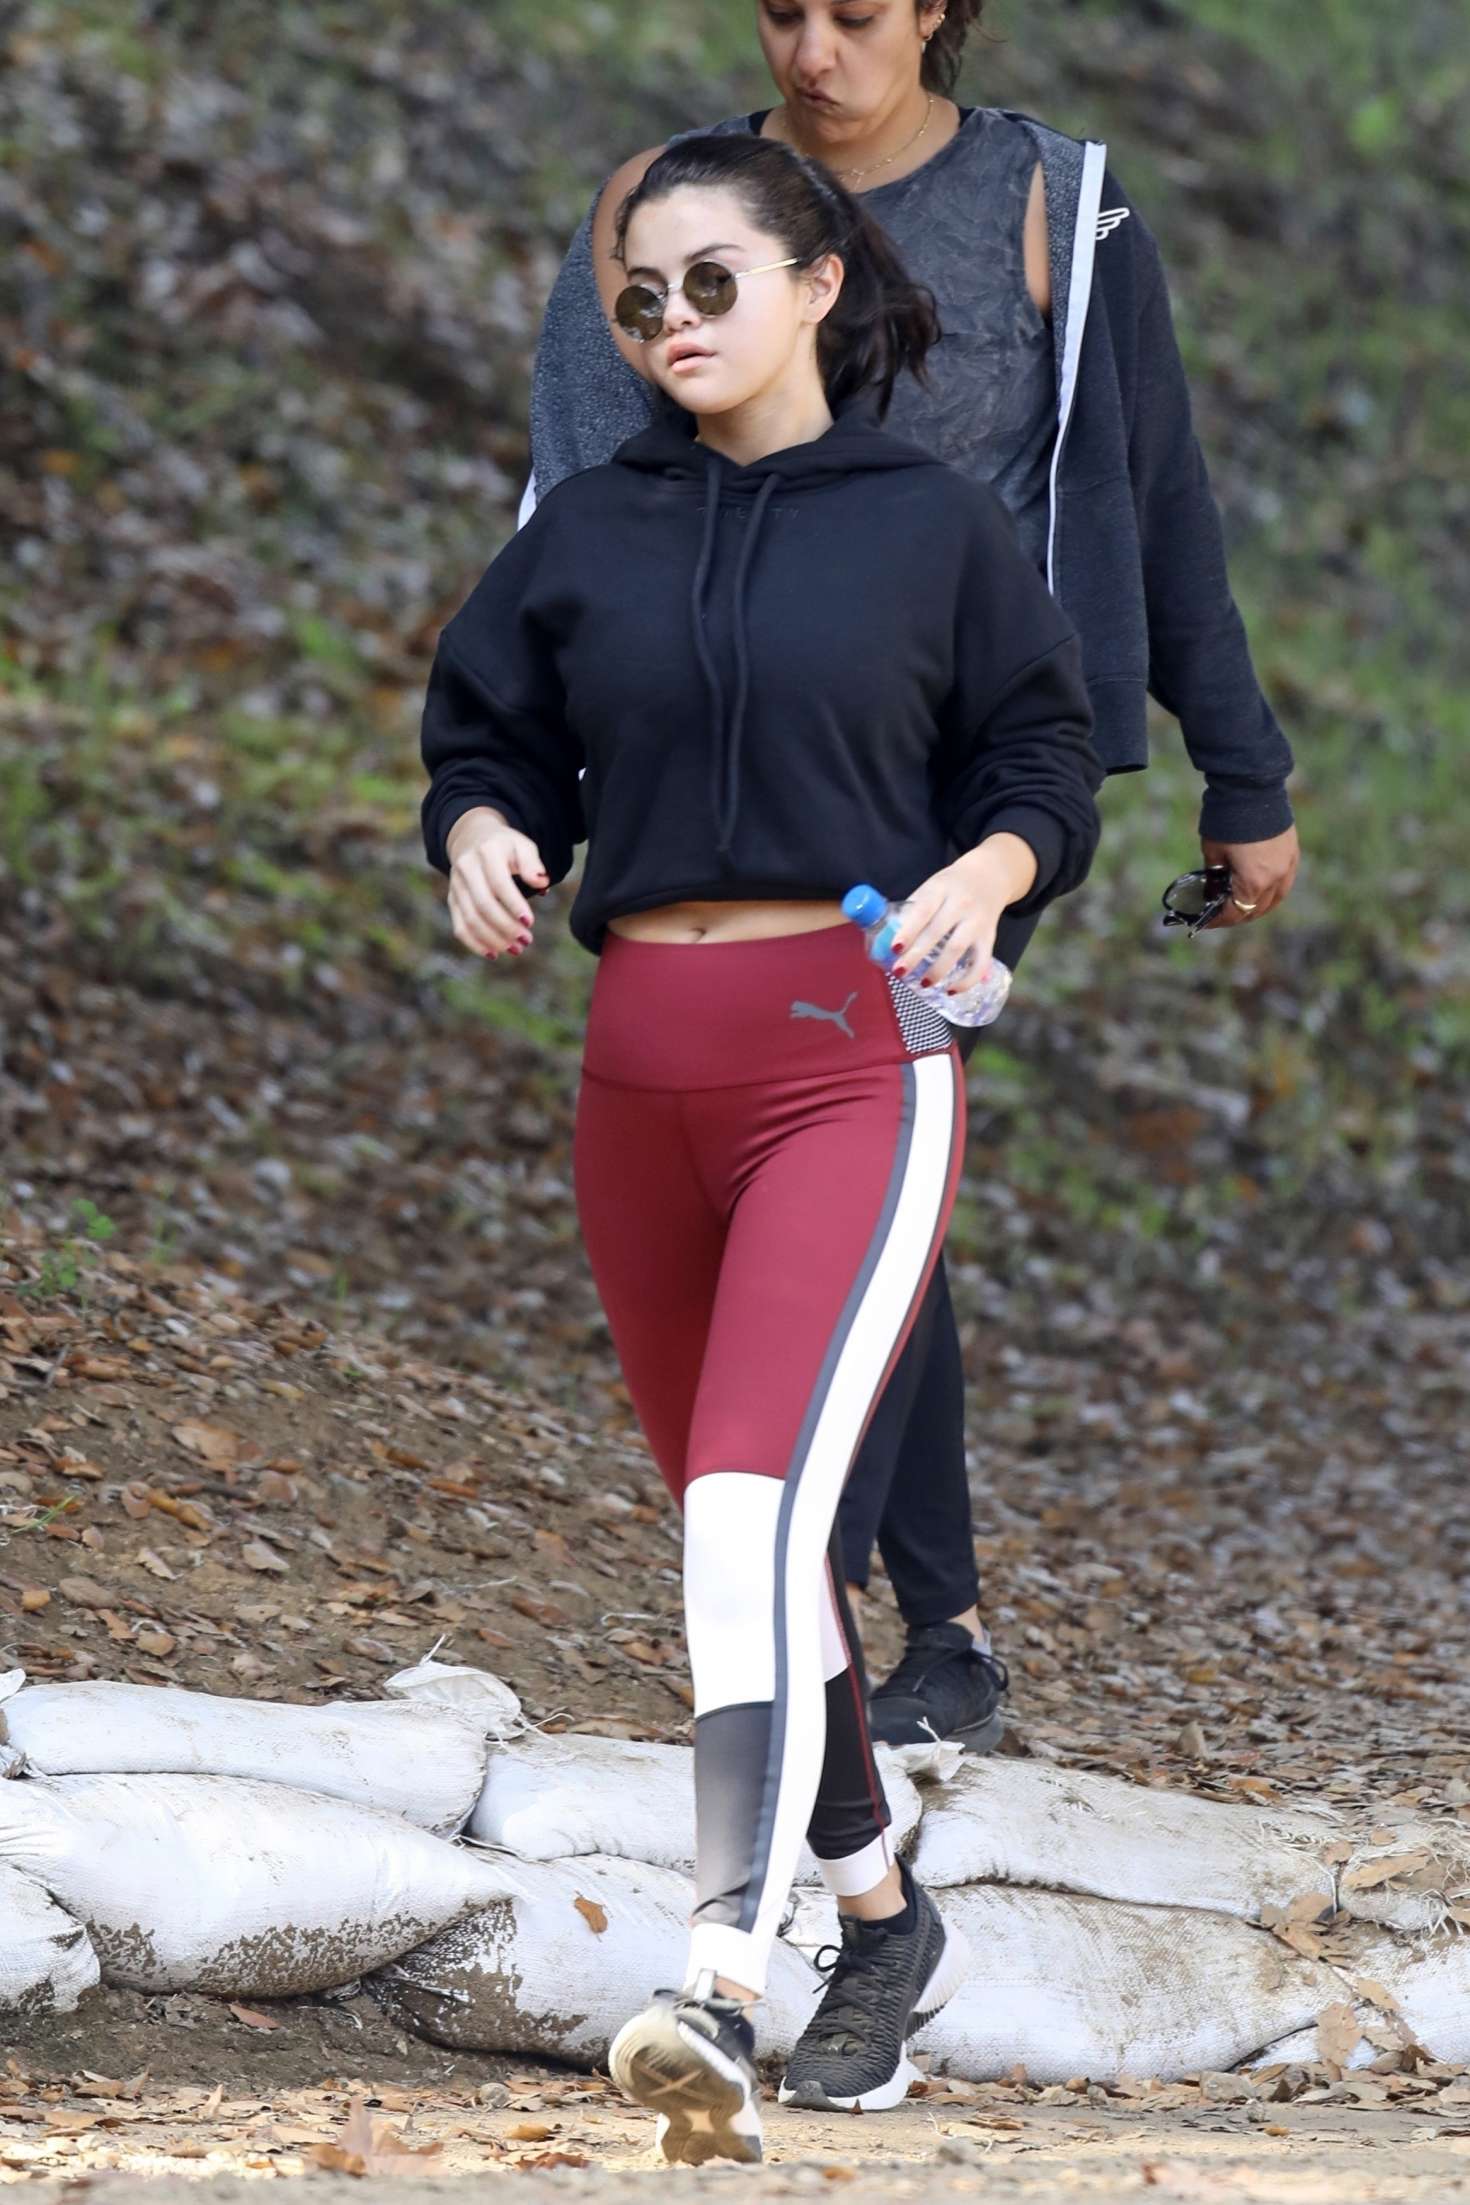 Selena Gomez in Tights â€“ Out for a hike in Los Angeles